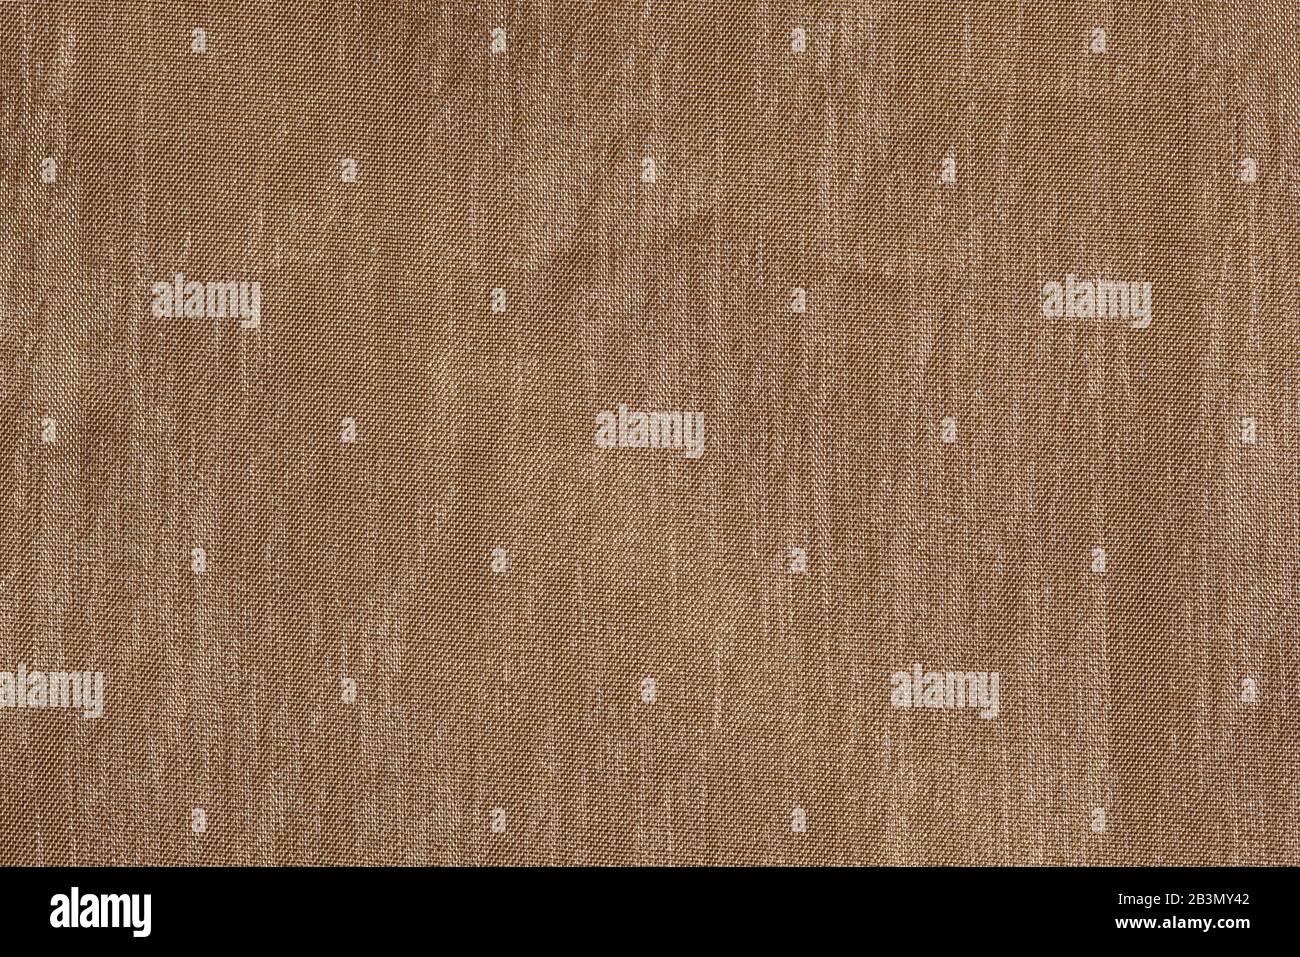 High resolution brown fabric texture background Stock Photo